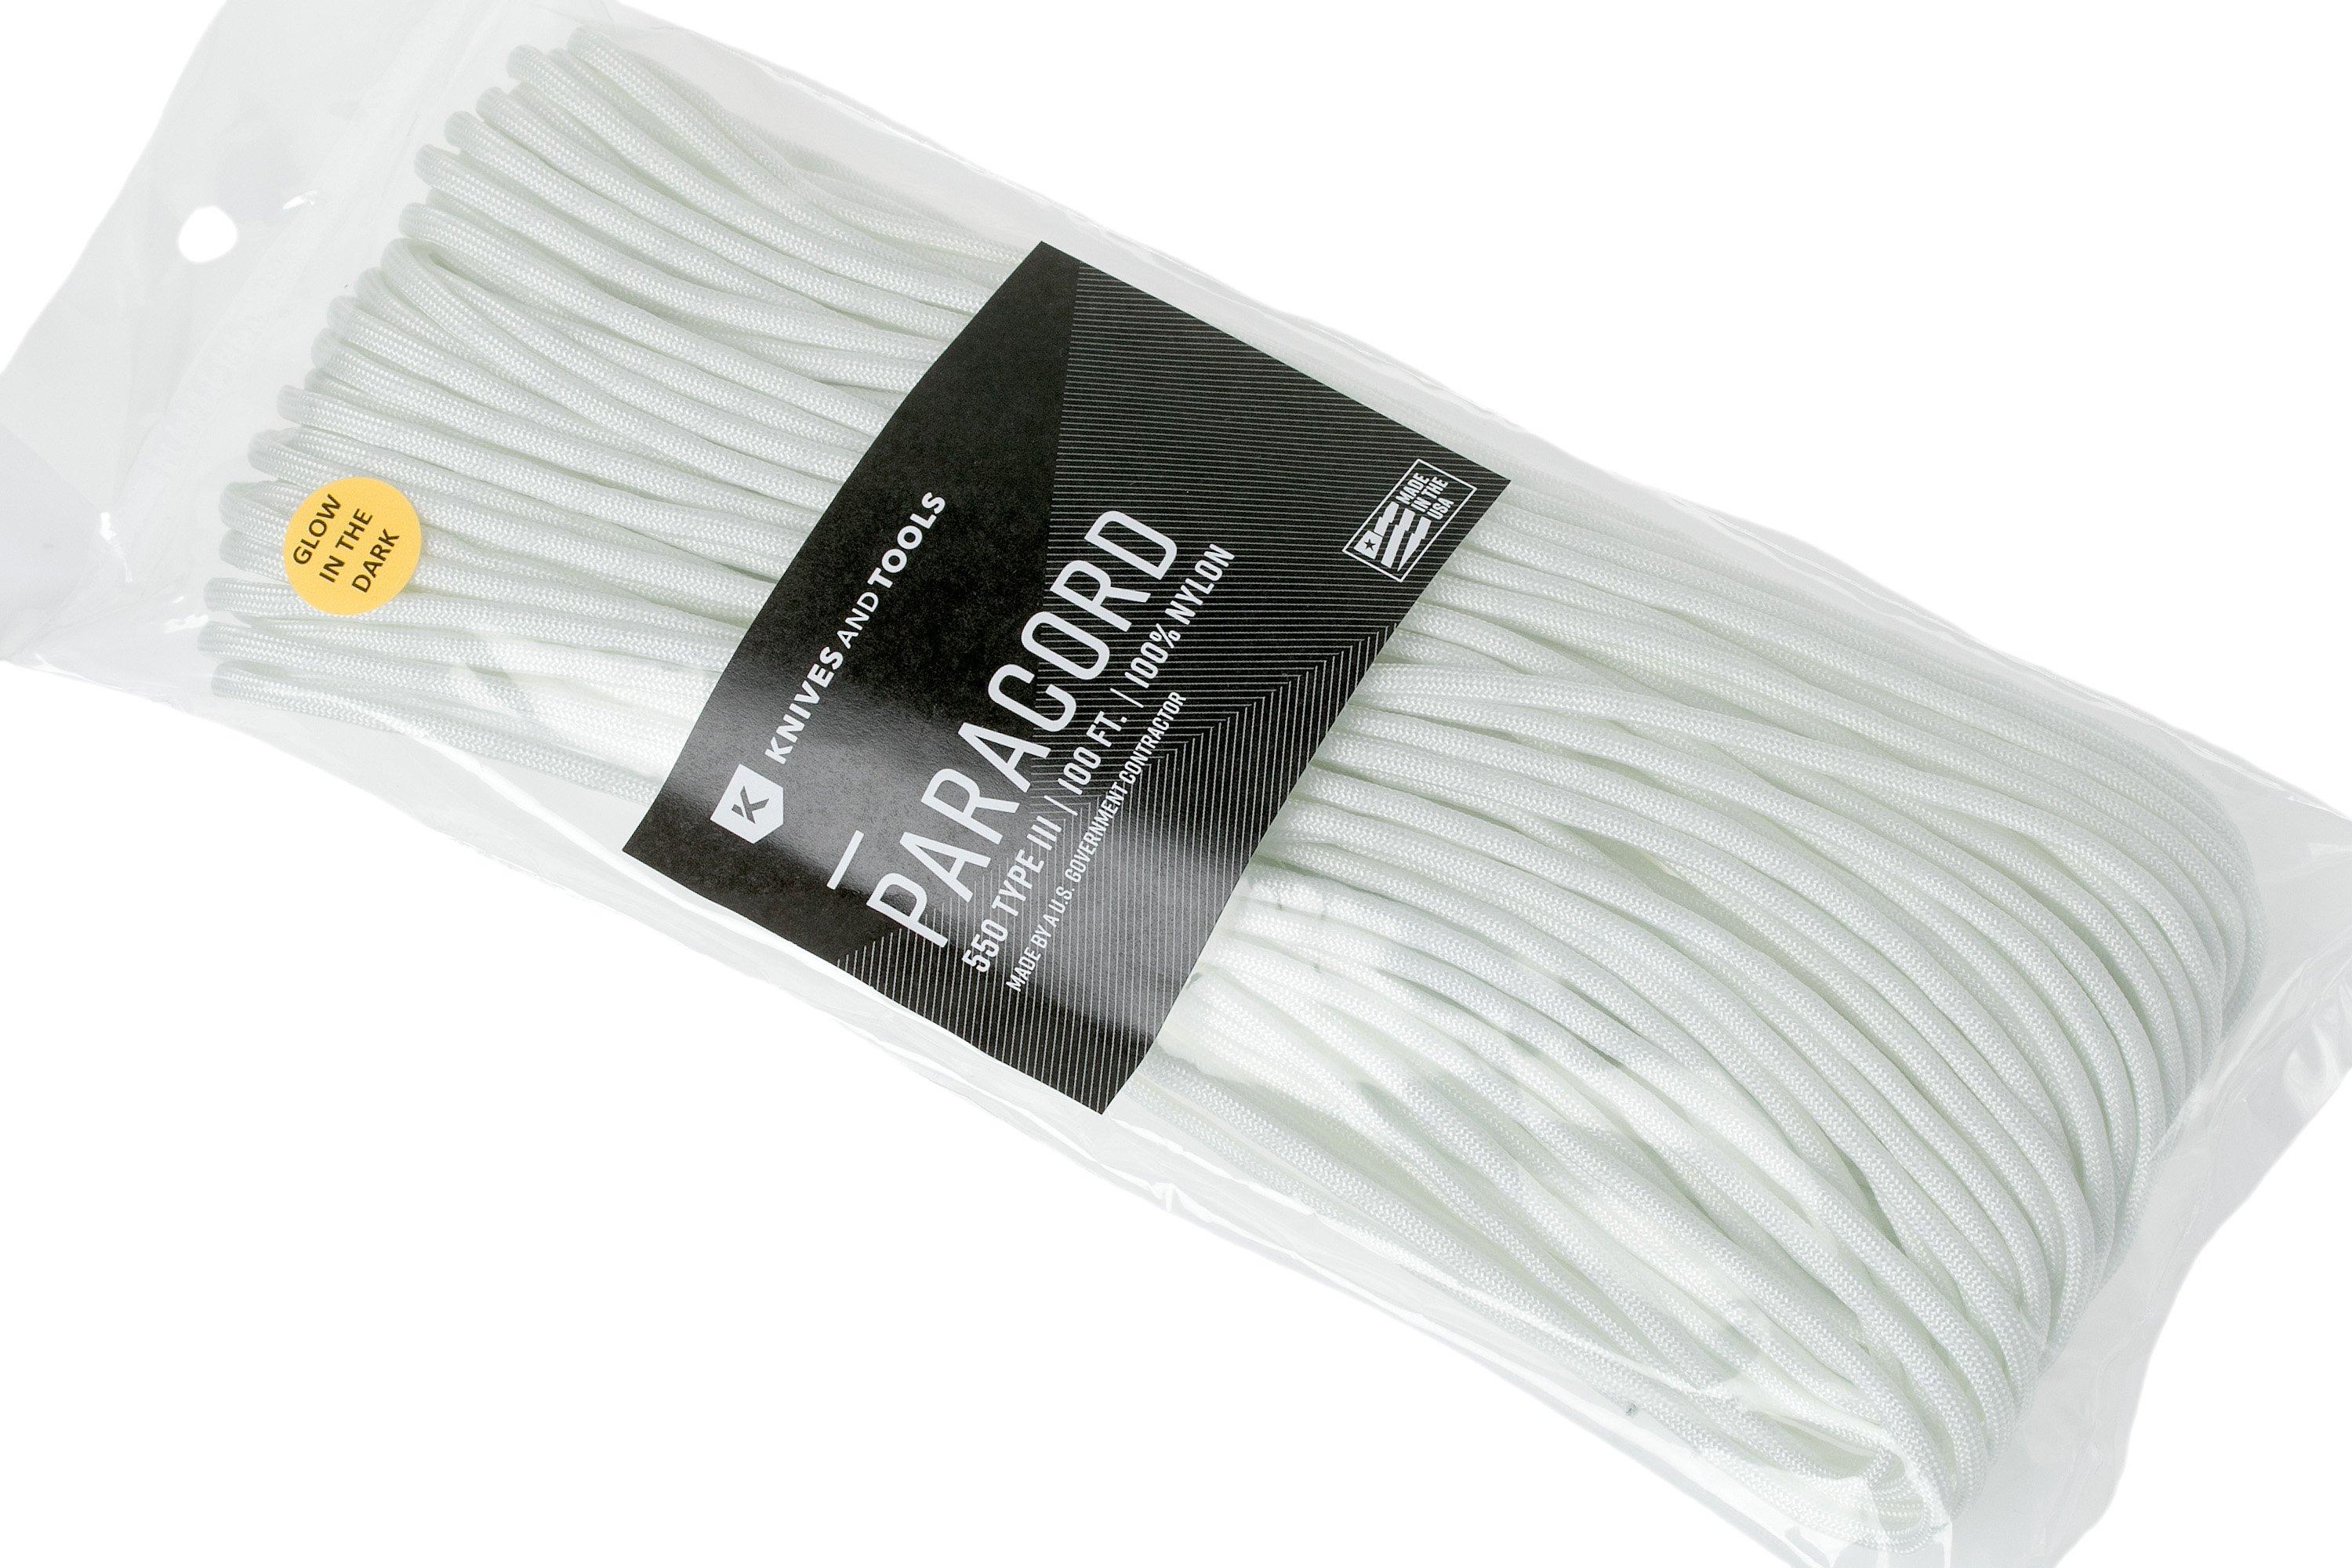 Knivesandtools 550 paracord type III, colour: white w/ glow in the